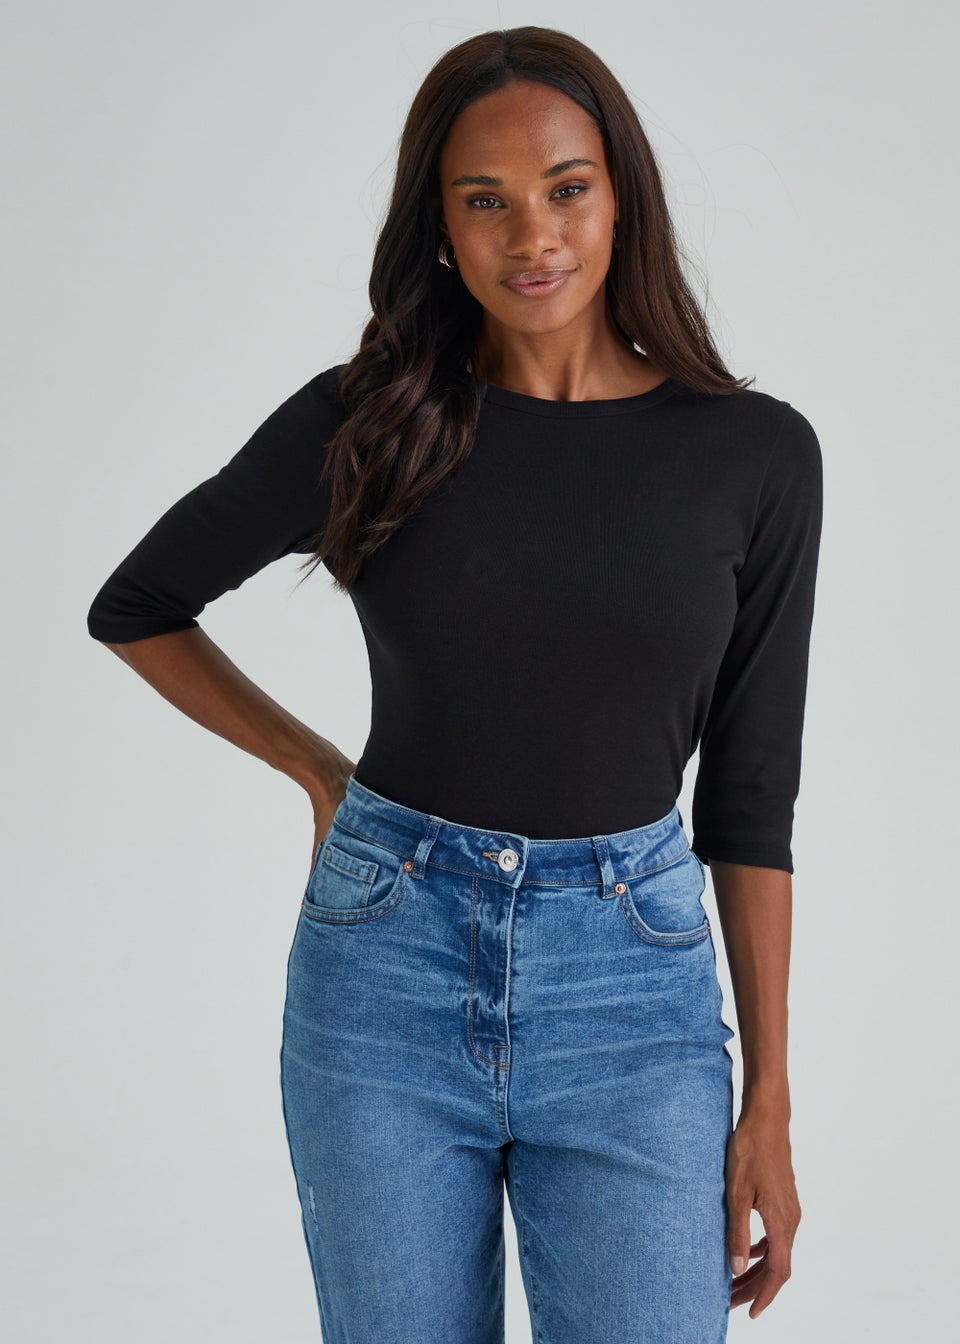 Tops for Women: Comfortable yet stylish tops you can wear during